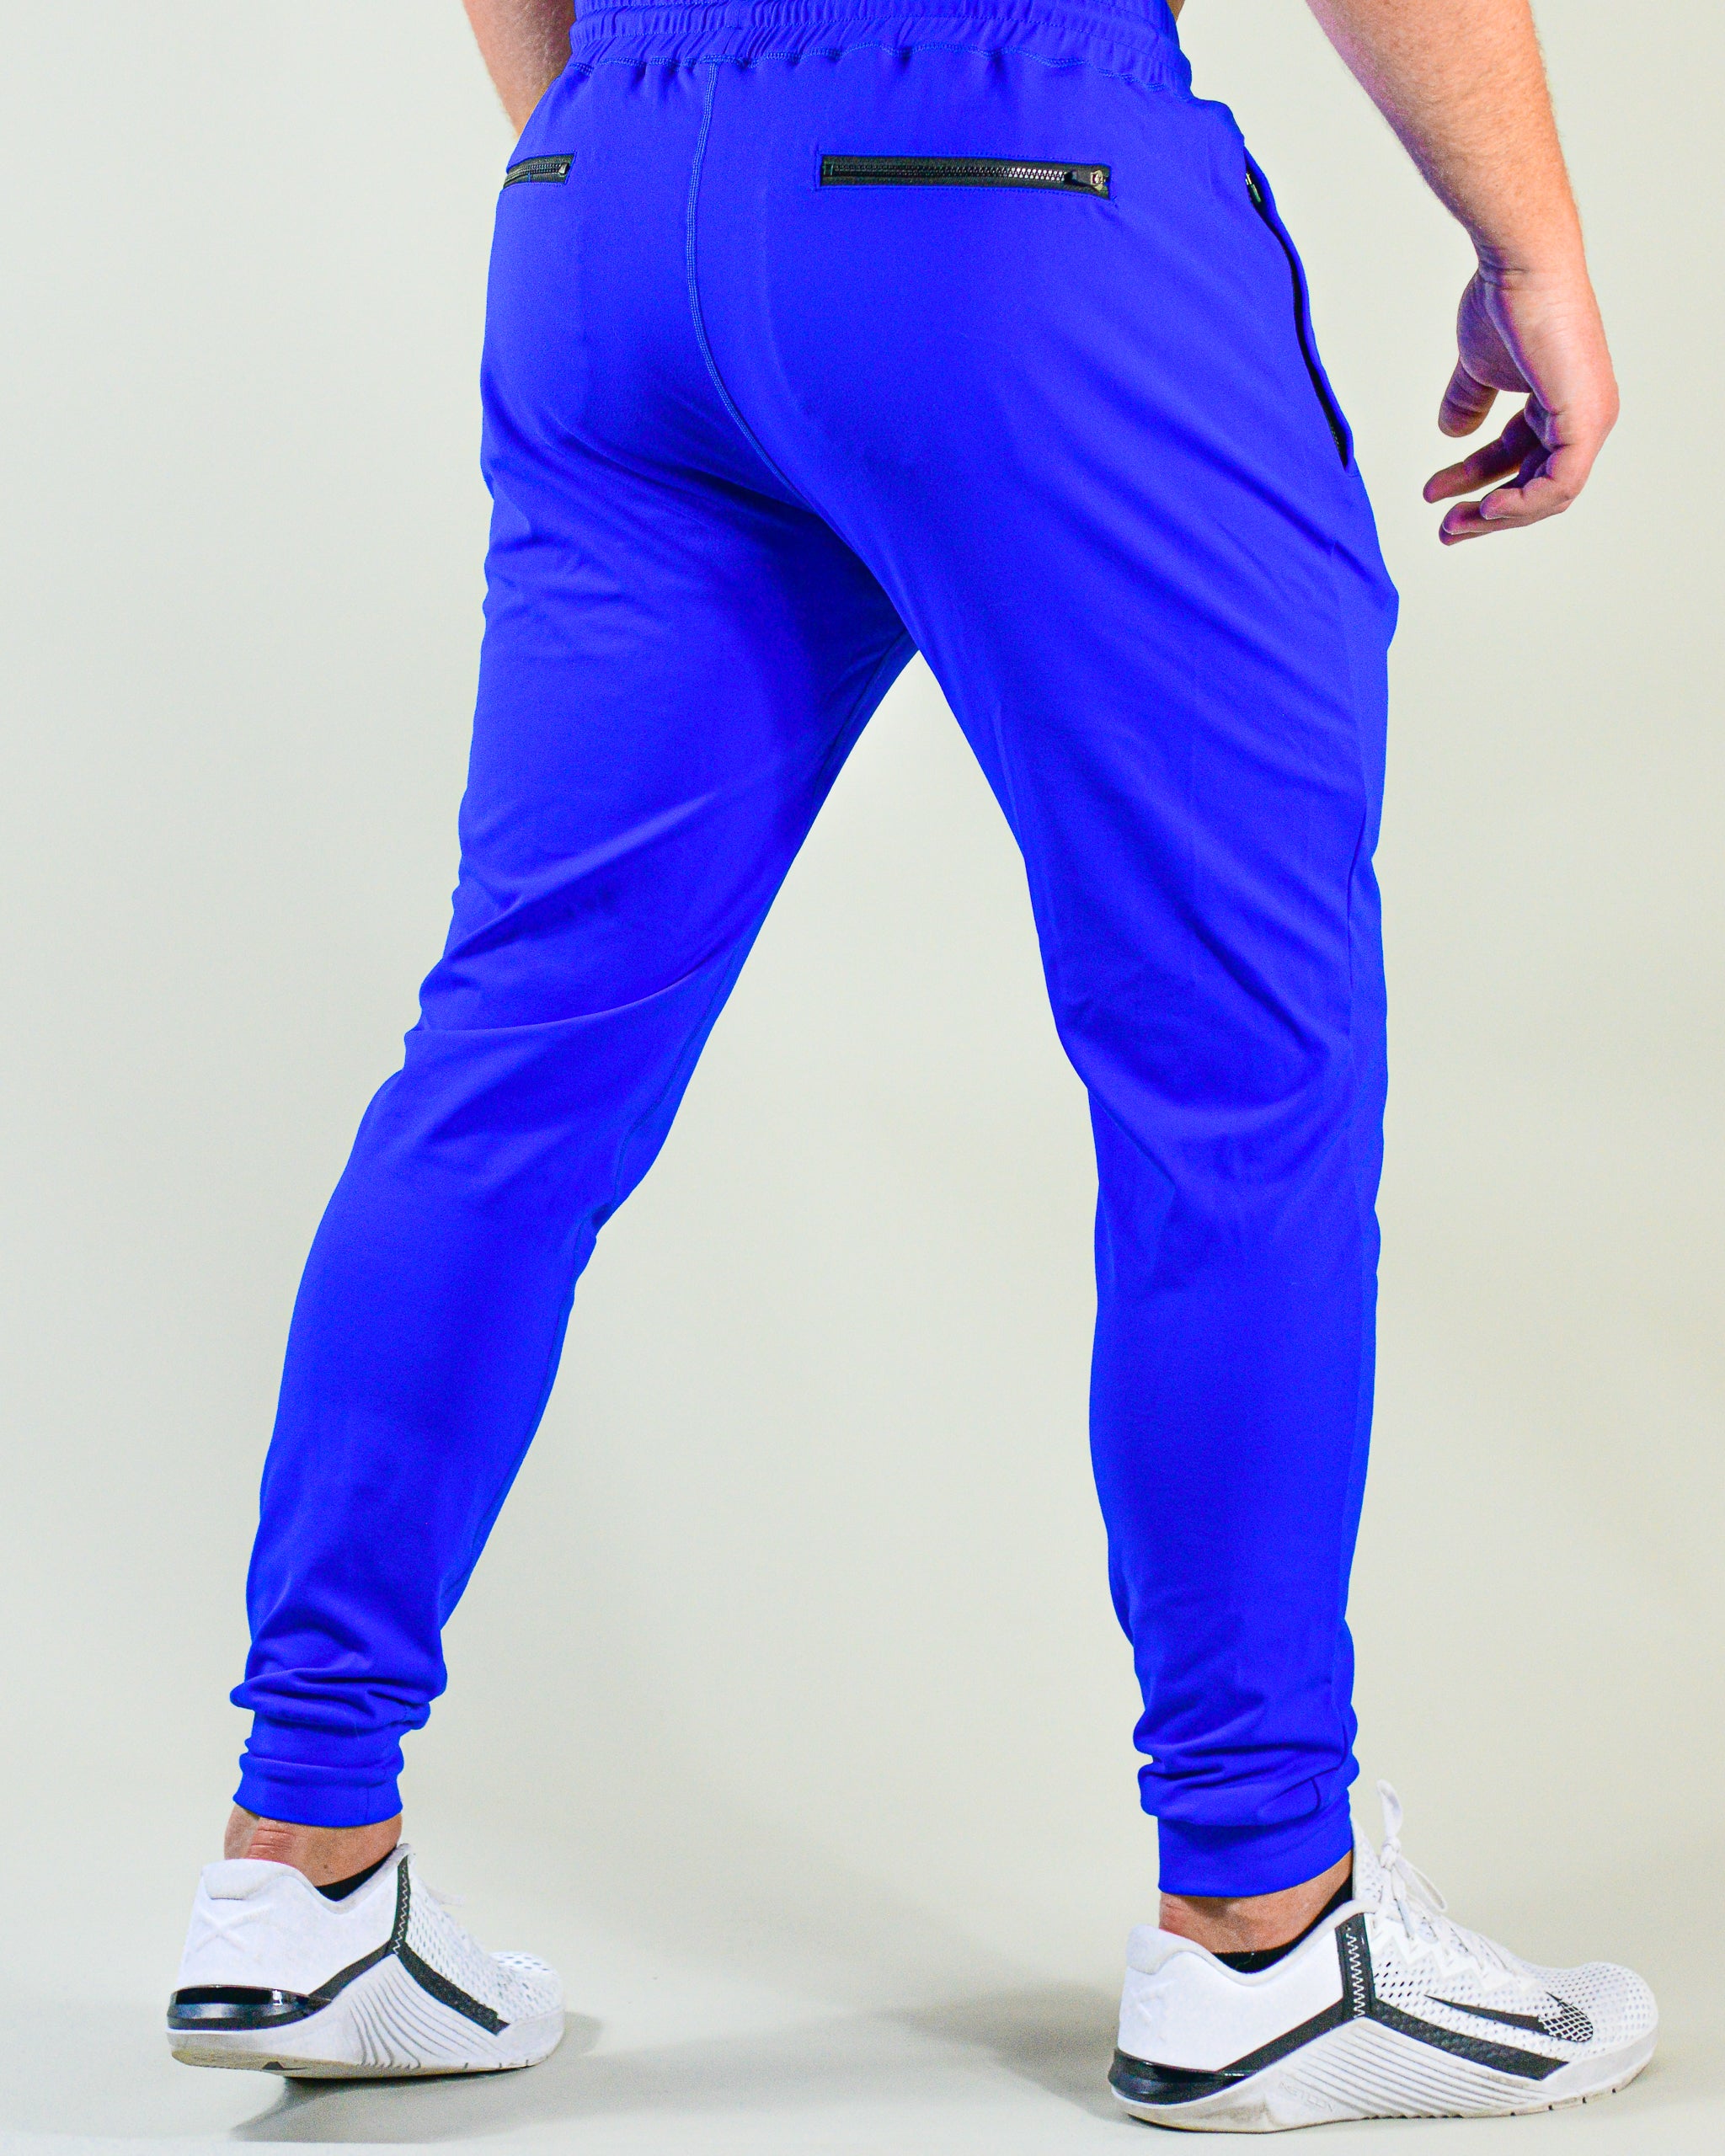 Blue Sigma Tapered Sweatsuit Joggers – The King McNeal Collection